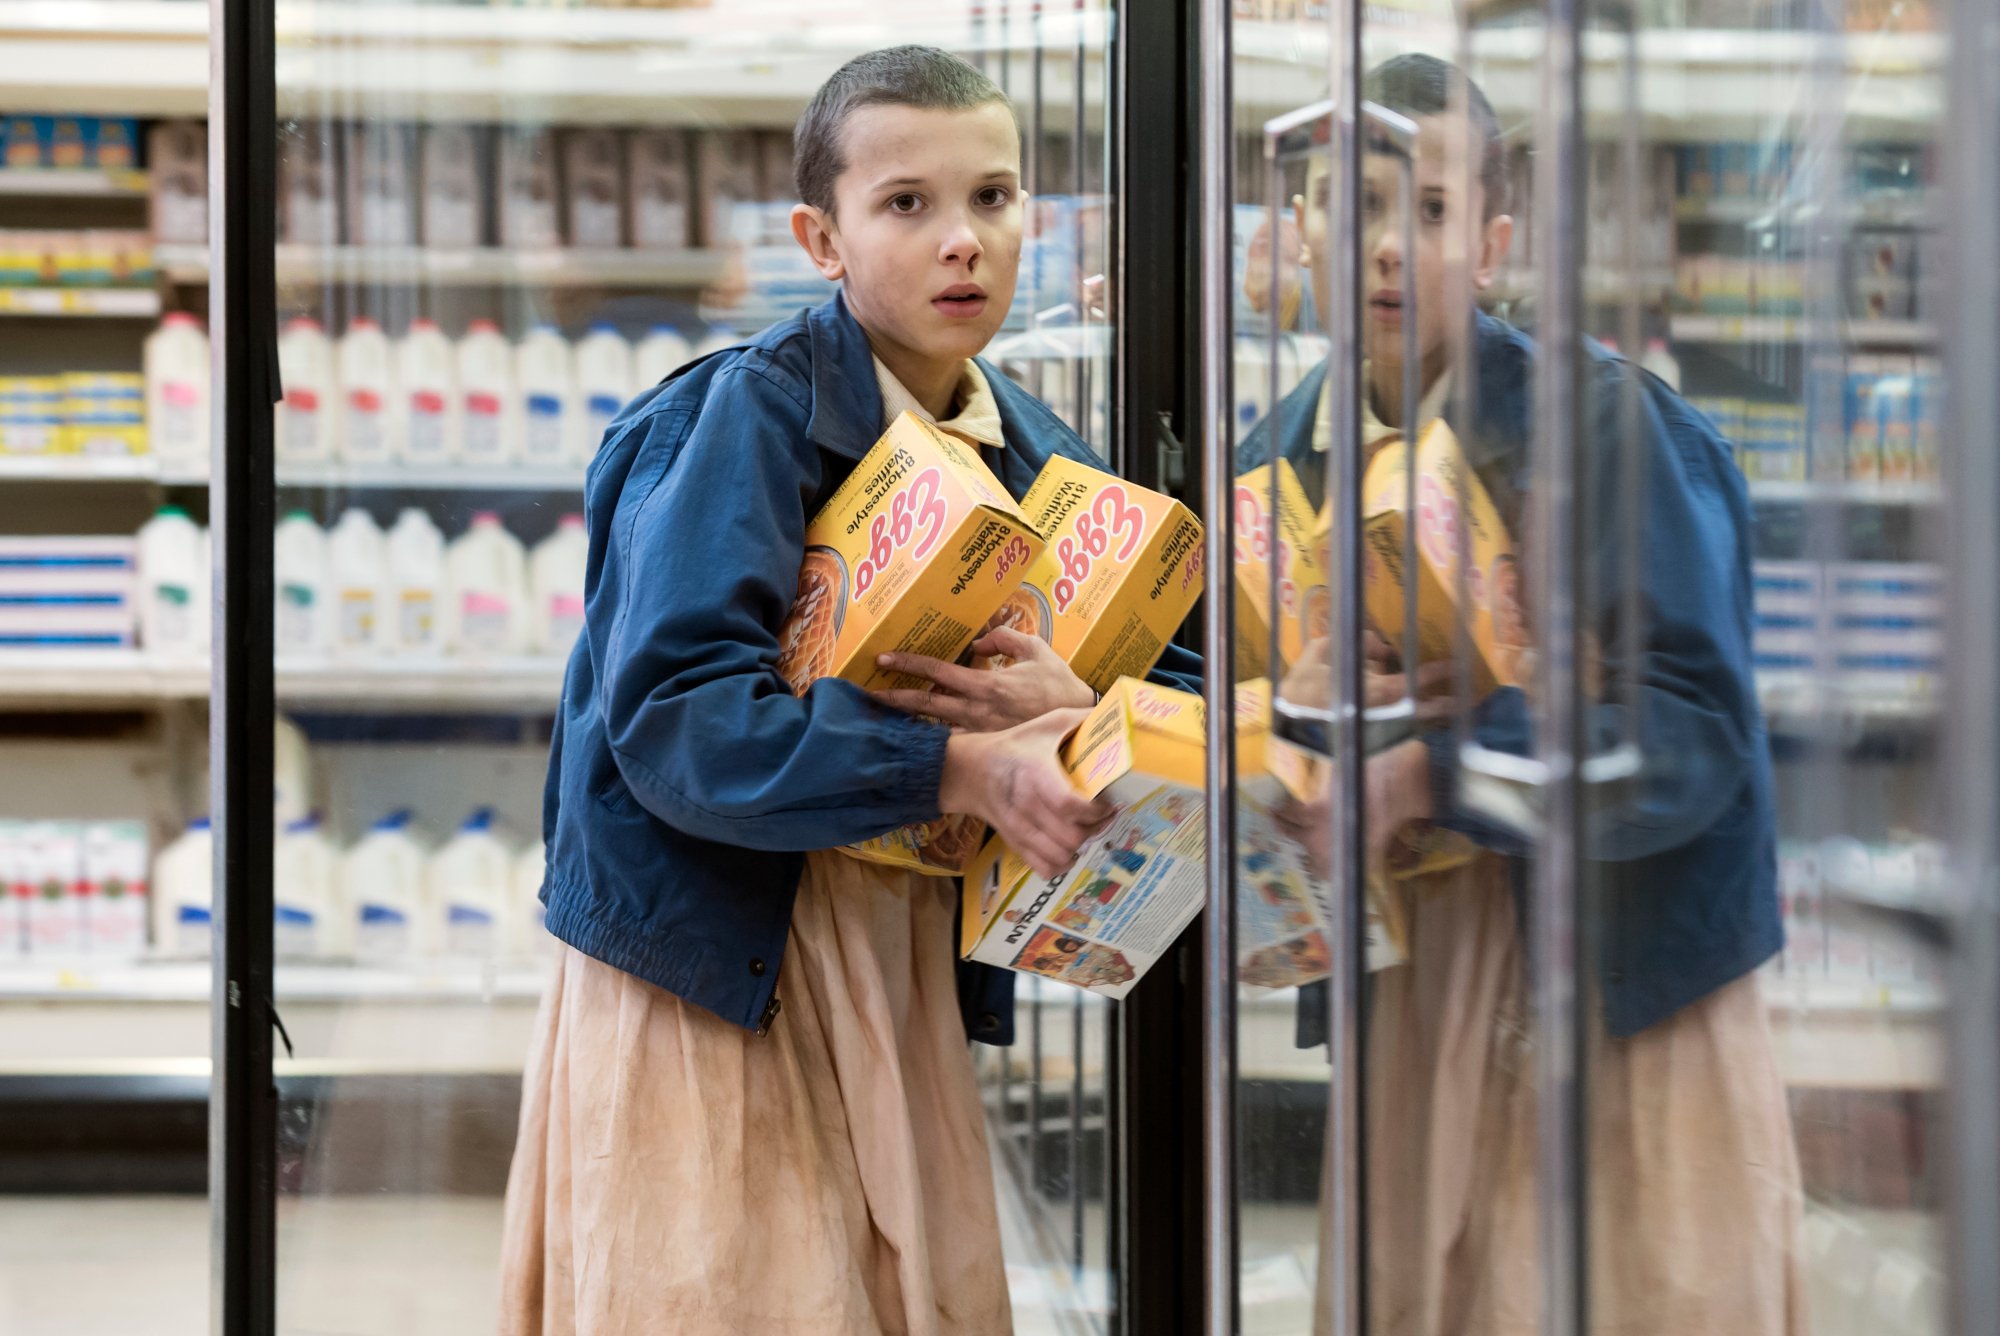 Millie Bobby Brown as Eleven in 'Stranger Things' Season 1 for our article about where to watch the show. She's standing next to a store refrigerator and holding several boxes of Eggo waffles.